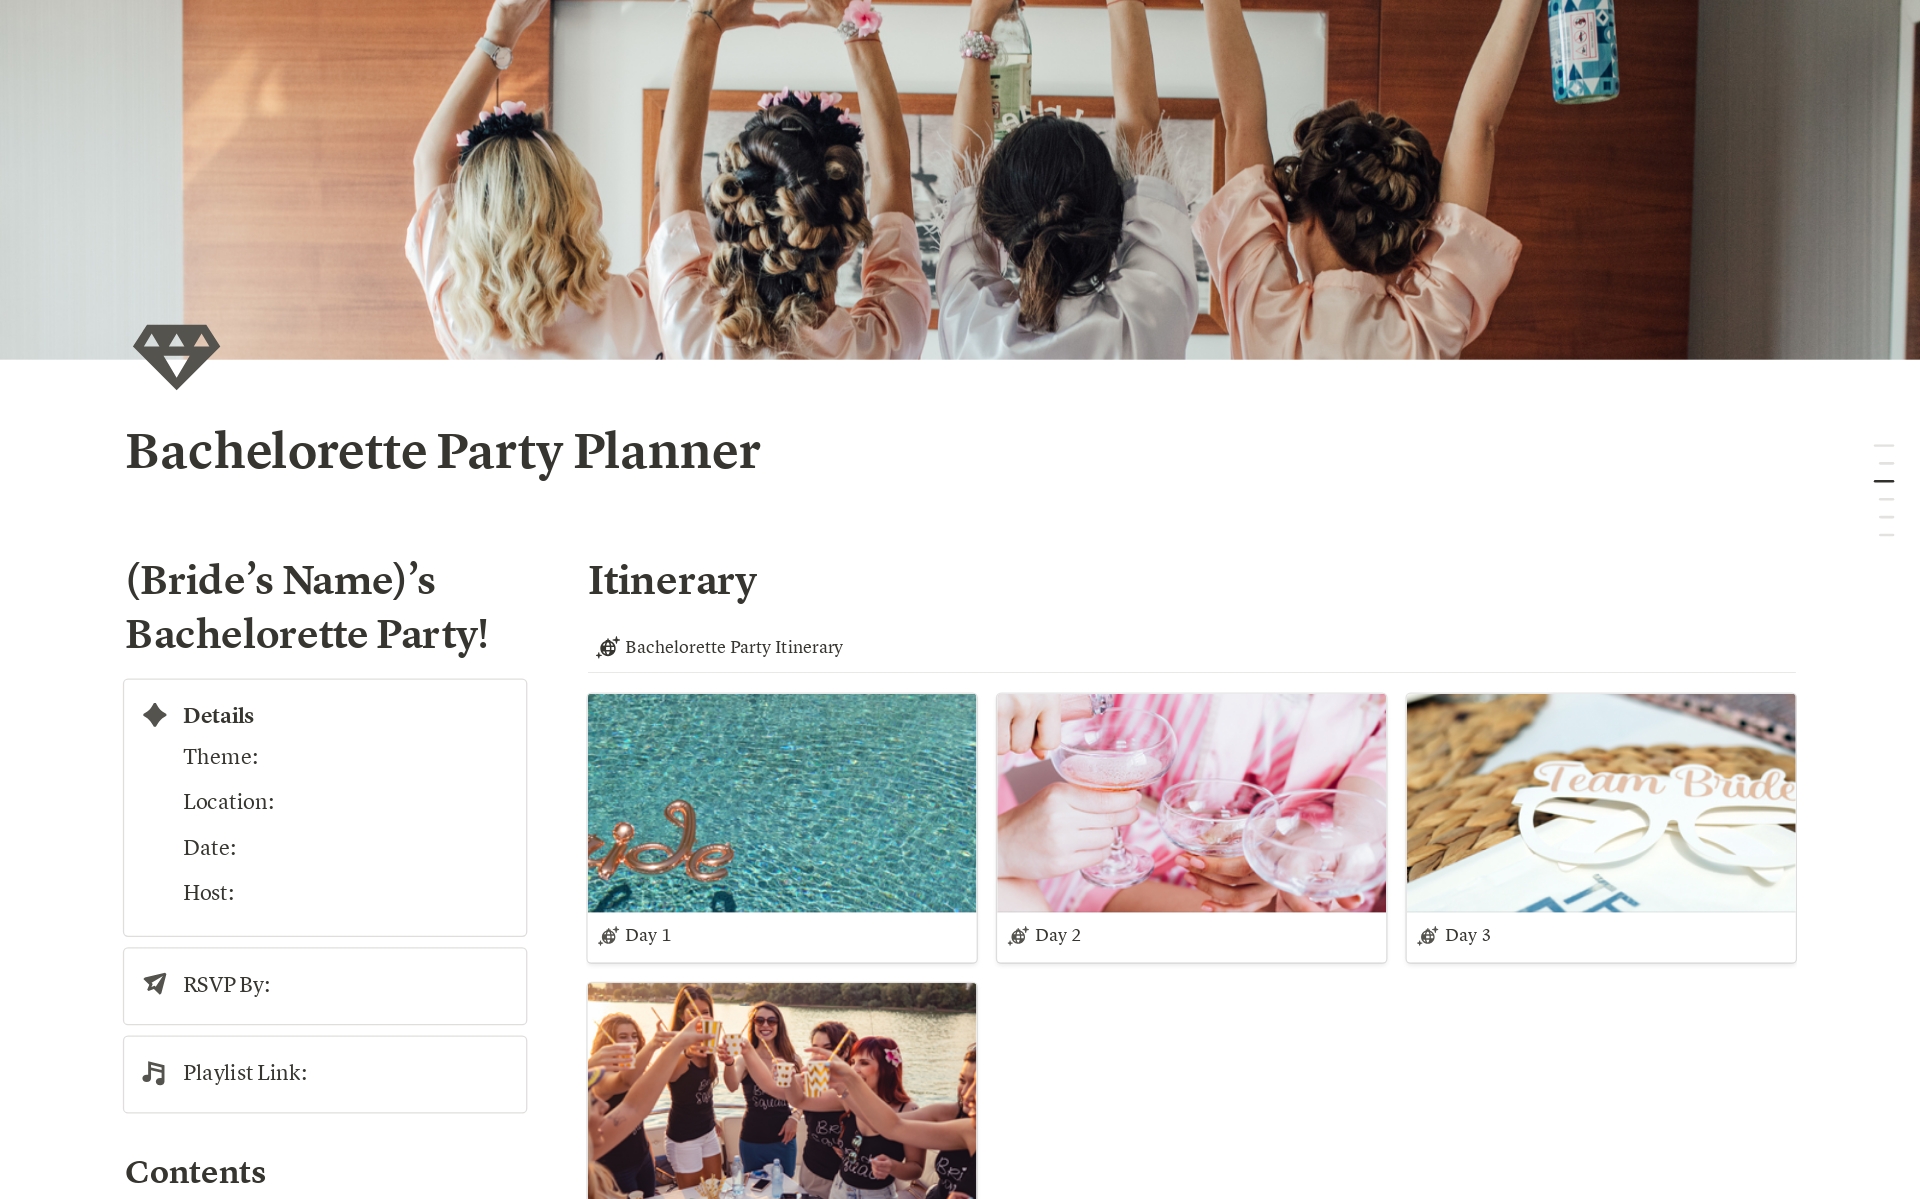 This Notion template is designed to help you plan and organize a memorable bachelorette weekend for the bride-to-be! From setting the date and location to organizing activities, this collaborative and customizable template includes everything you need.